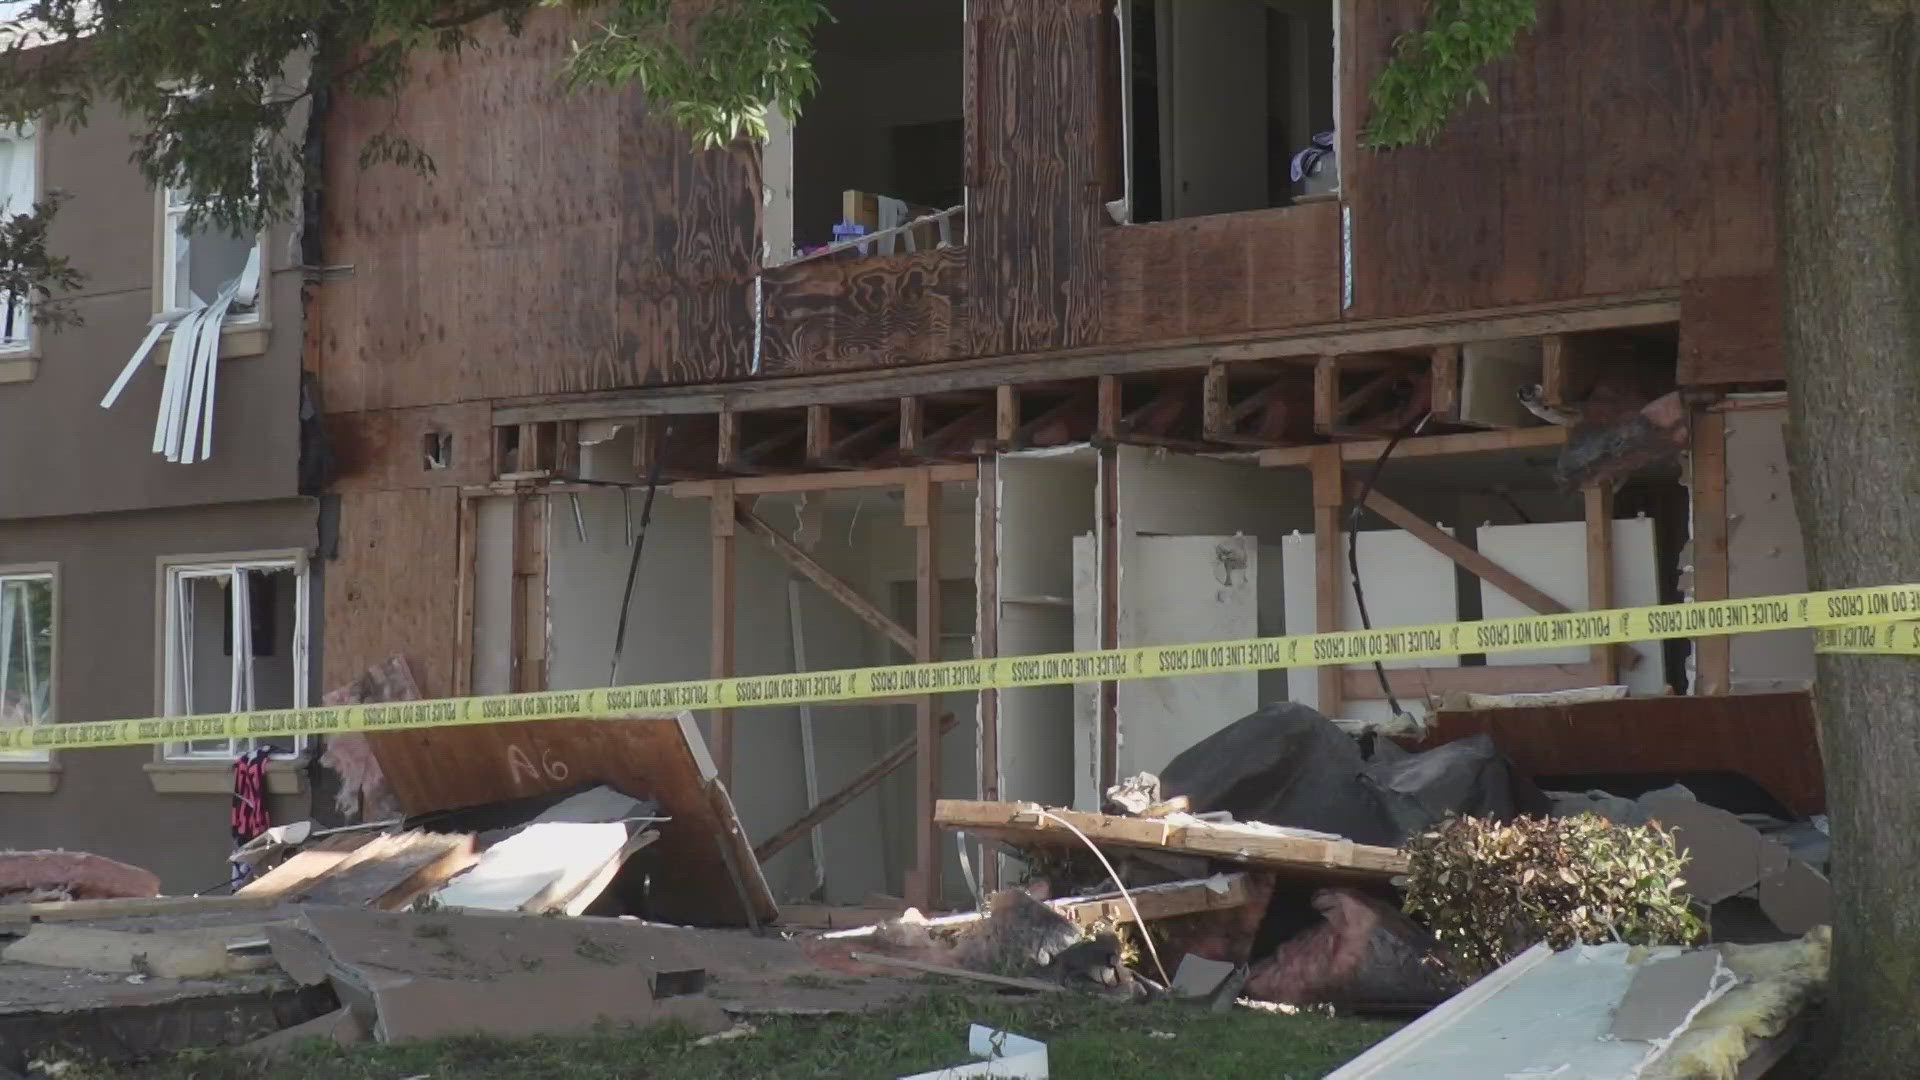 More than 30 residents are displaced after an explosion Sunday morning at an apartment complex in West Sacramento.